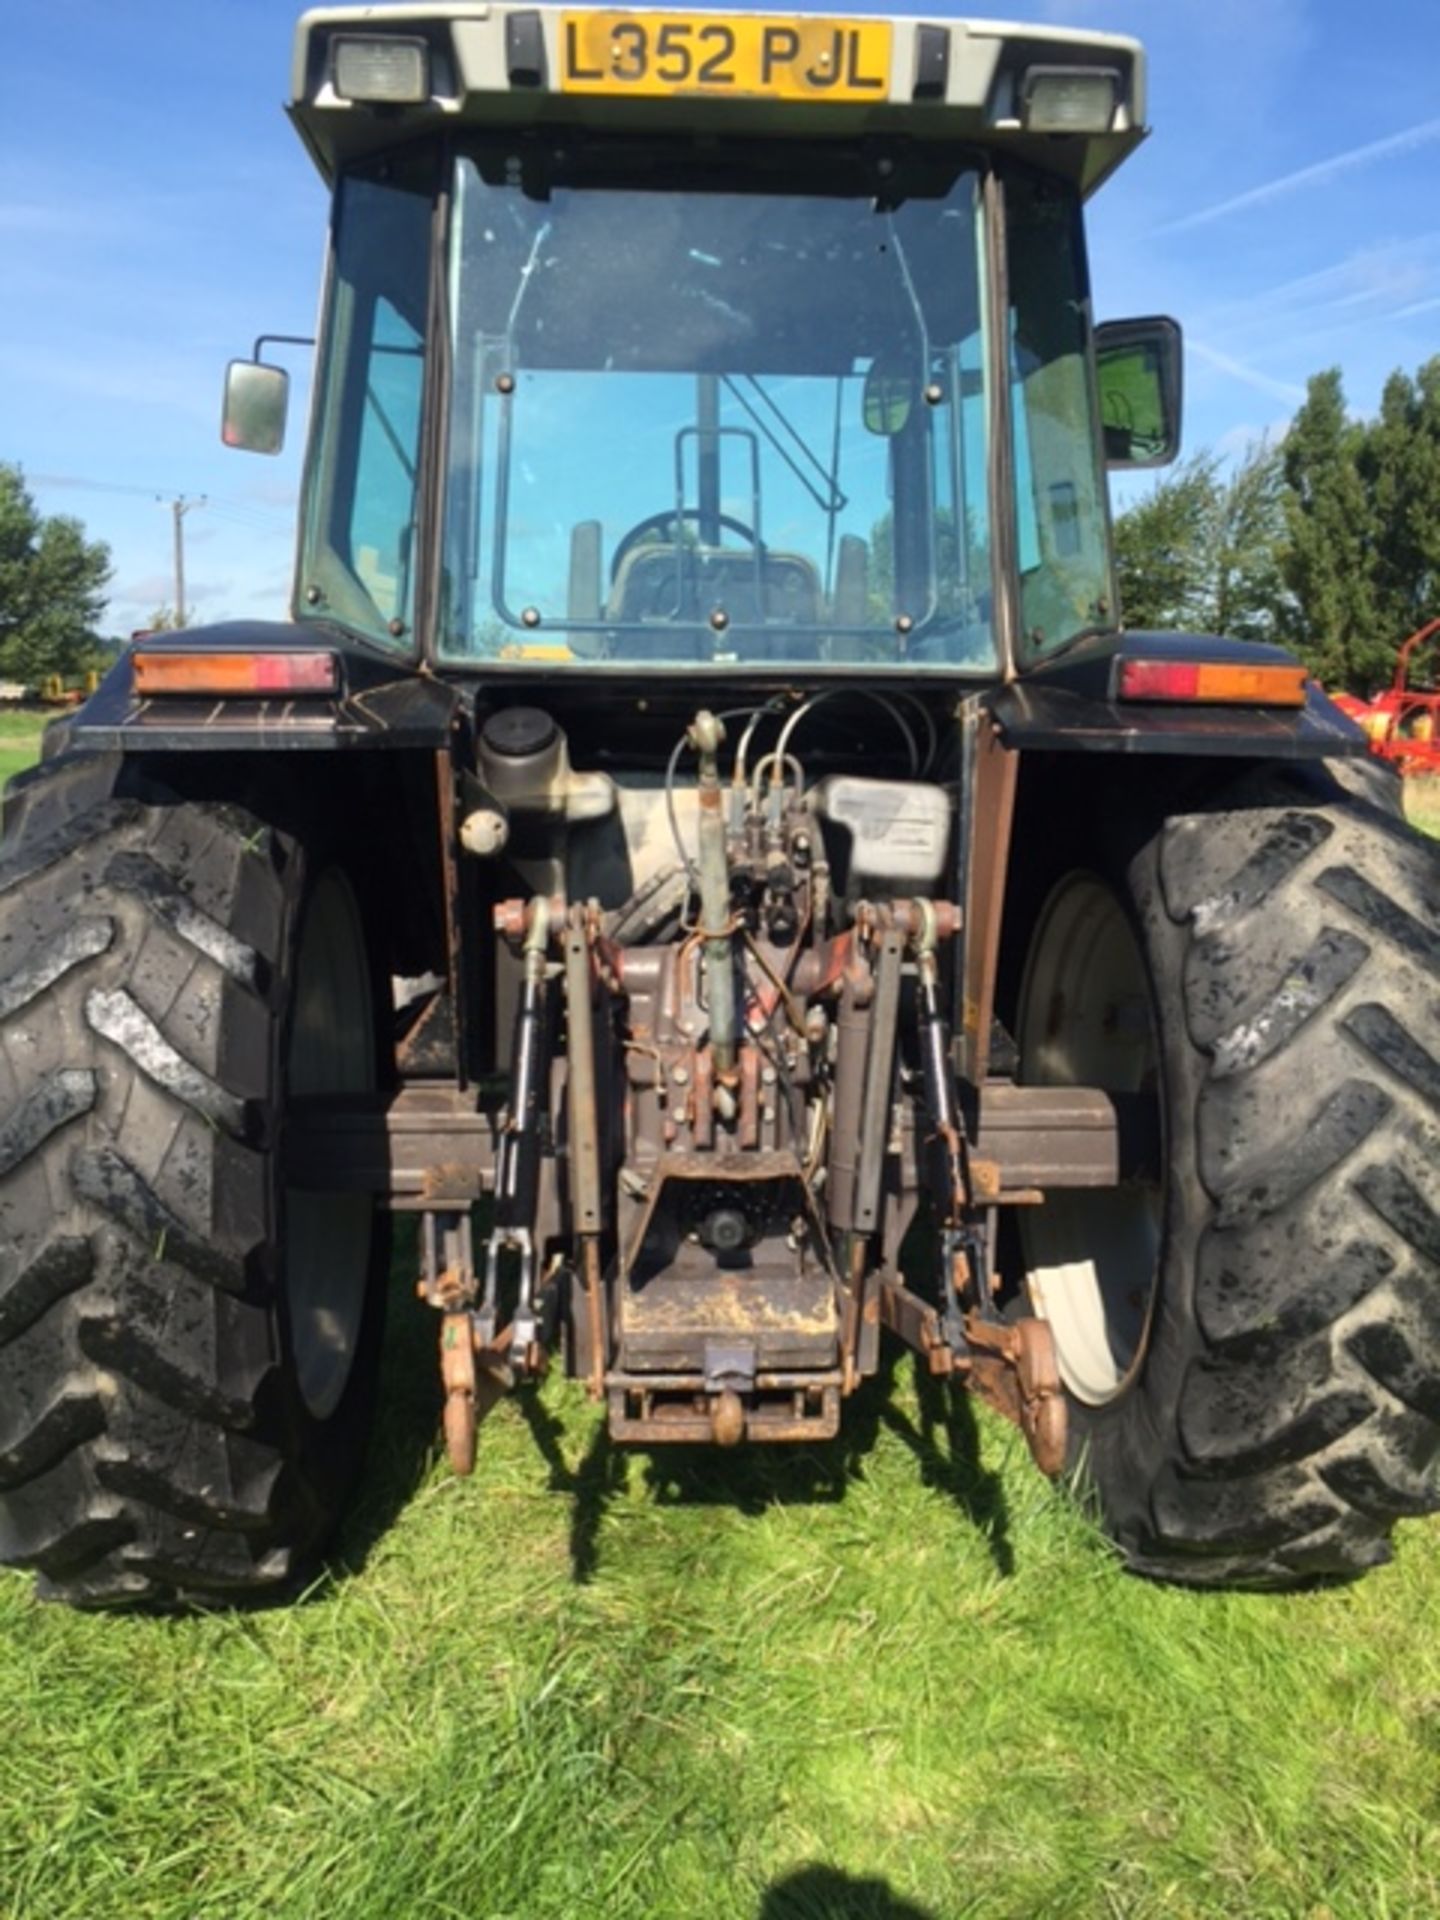 Massey Ferguson 3060 4wd Tractor with 16 Speed Gearbox & Air Con. V5 will be supplied. Reg. No. L352 - Image 3 of 4